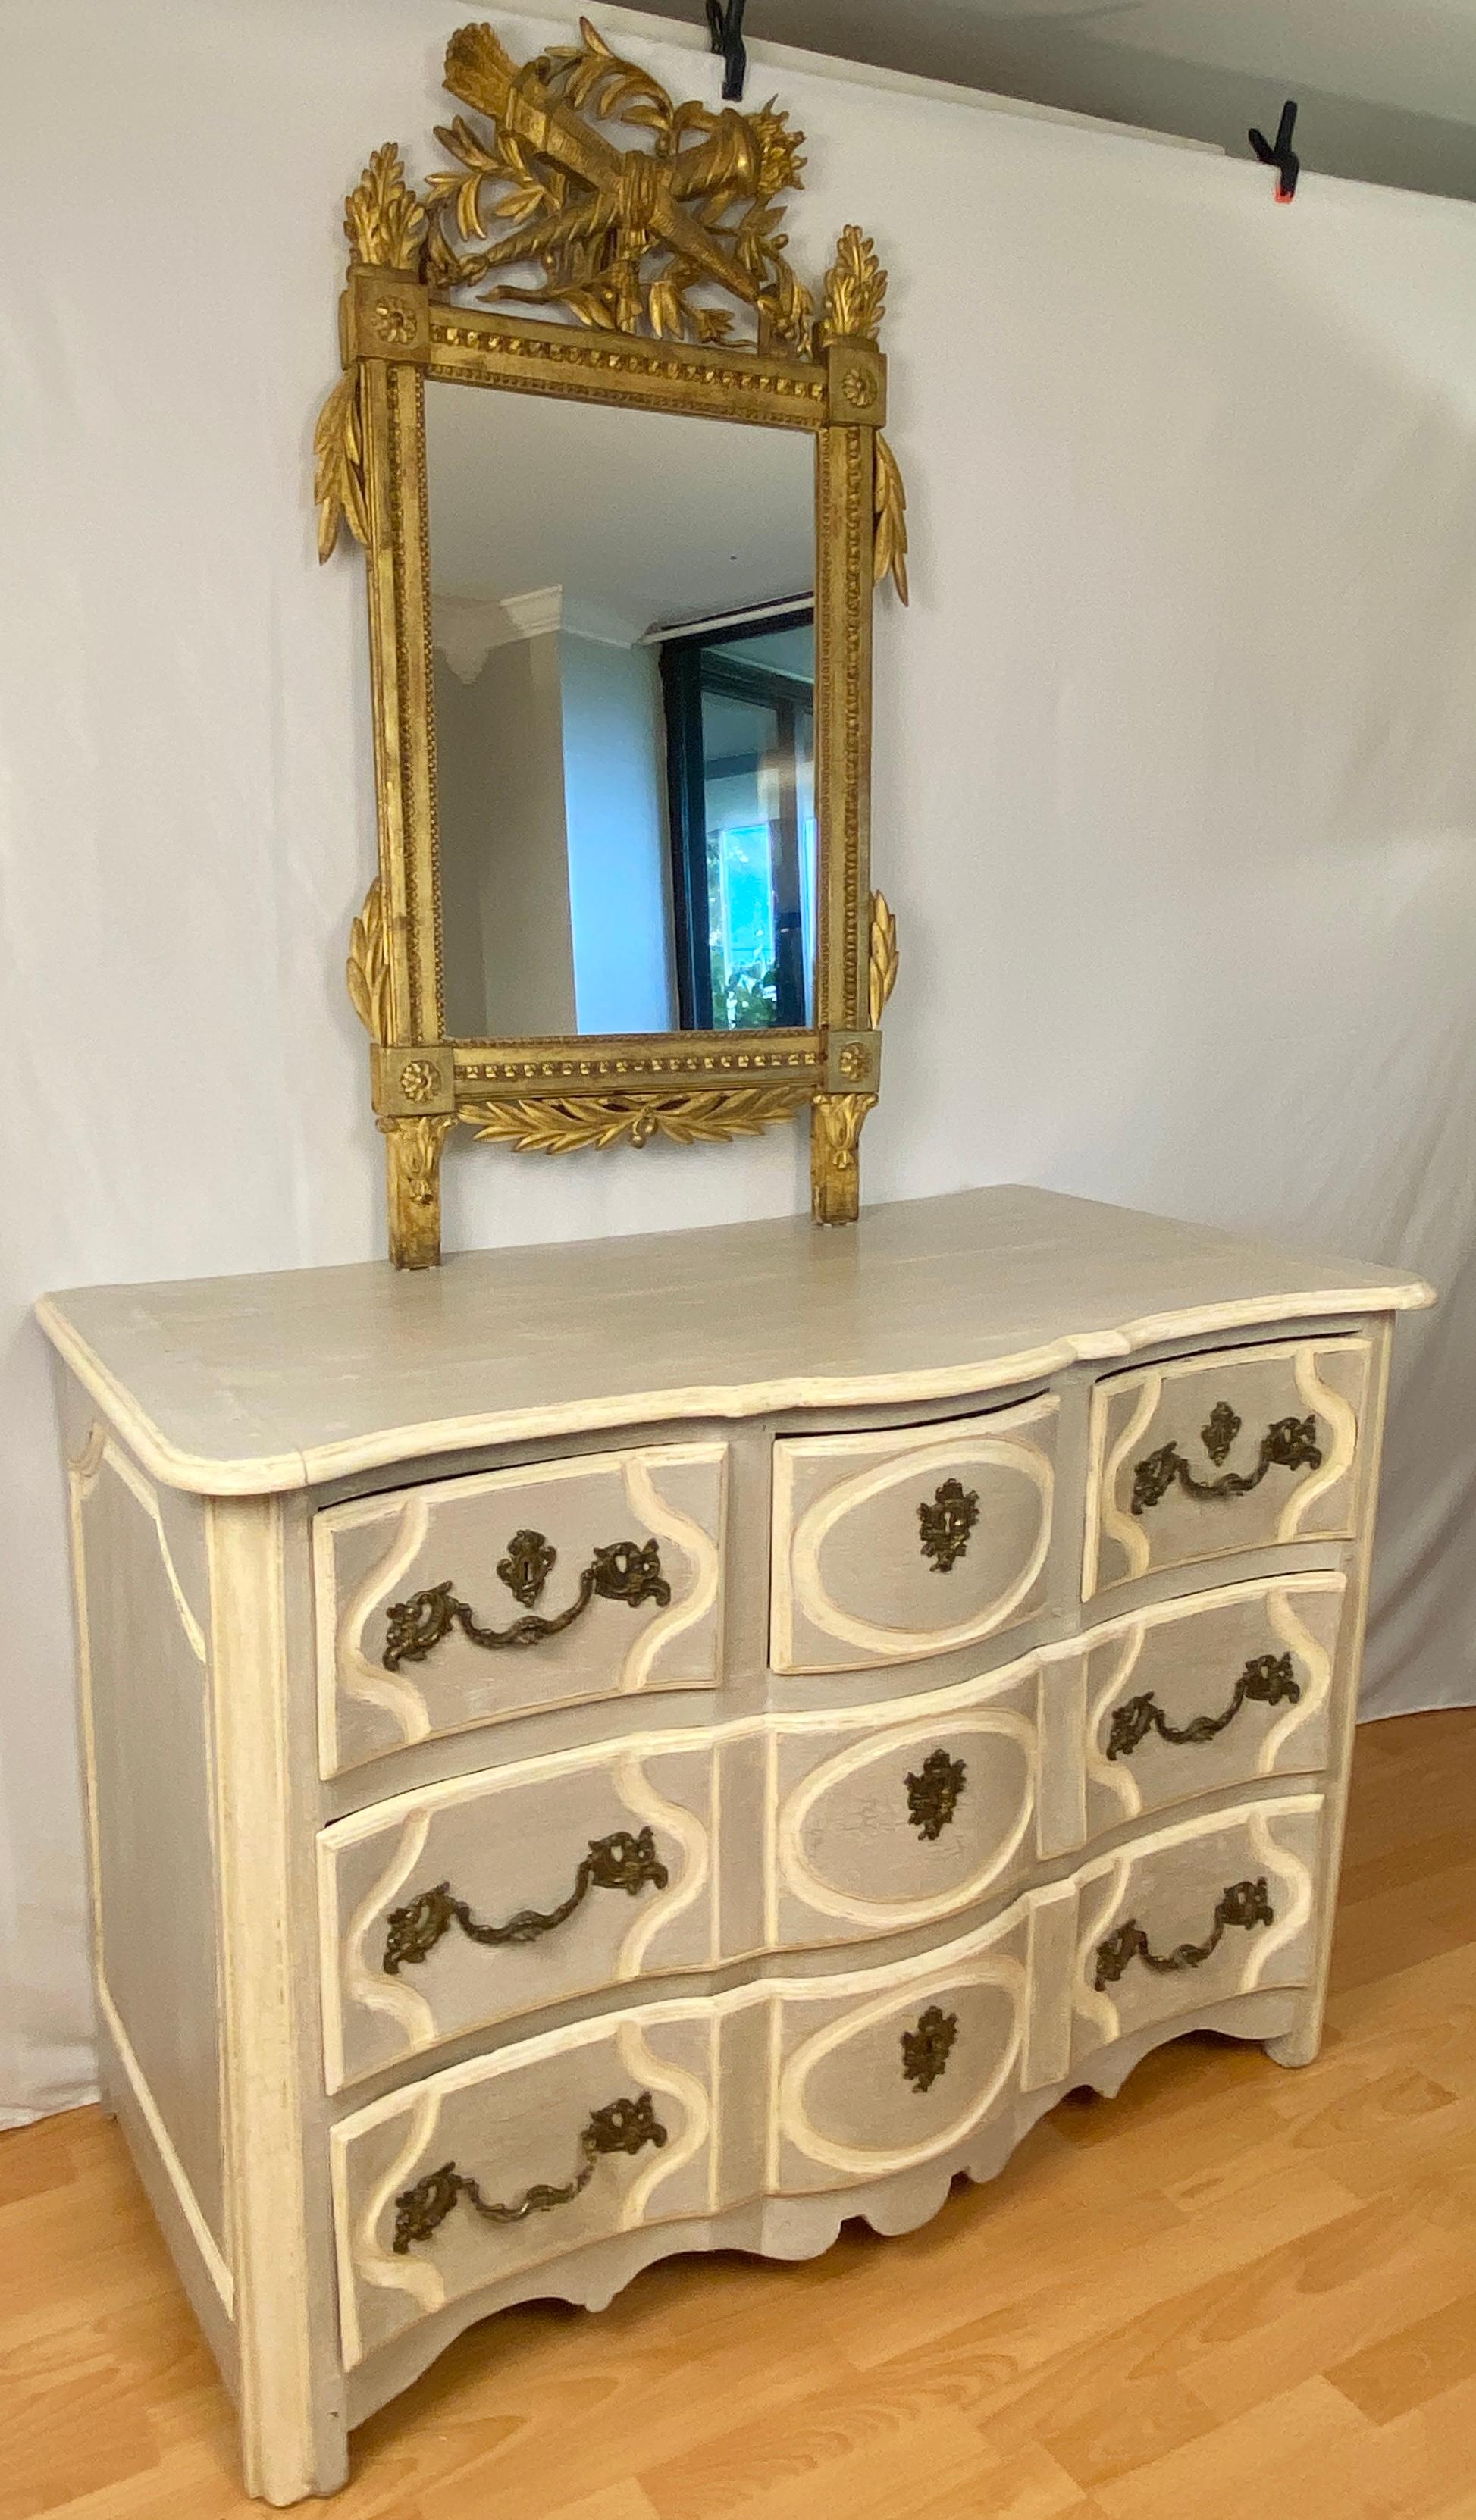 A fine 18th Century French Louis XV Commode with a Painted Finish.
French Louis XV period five drawer commode with blue and grey tones and antique white painted finish. This beautiful commode is a wonderful scale and has a great patina. It features